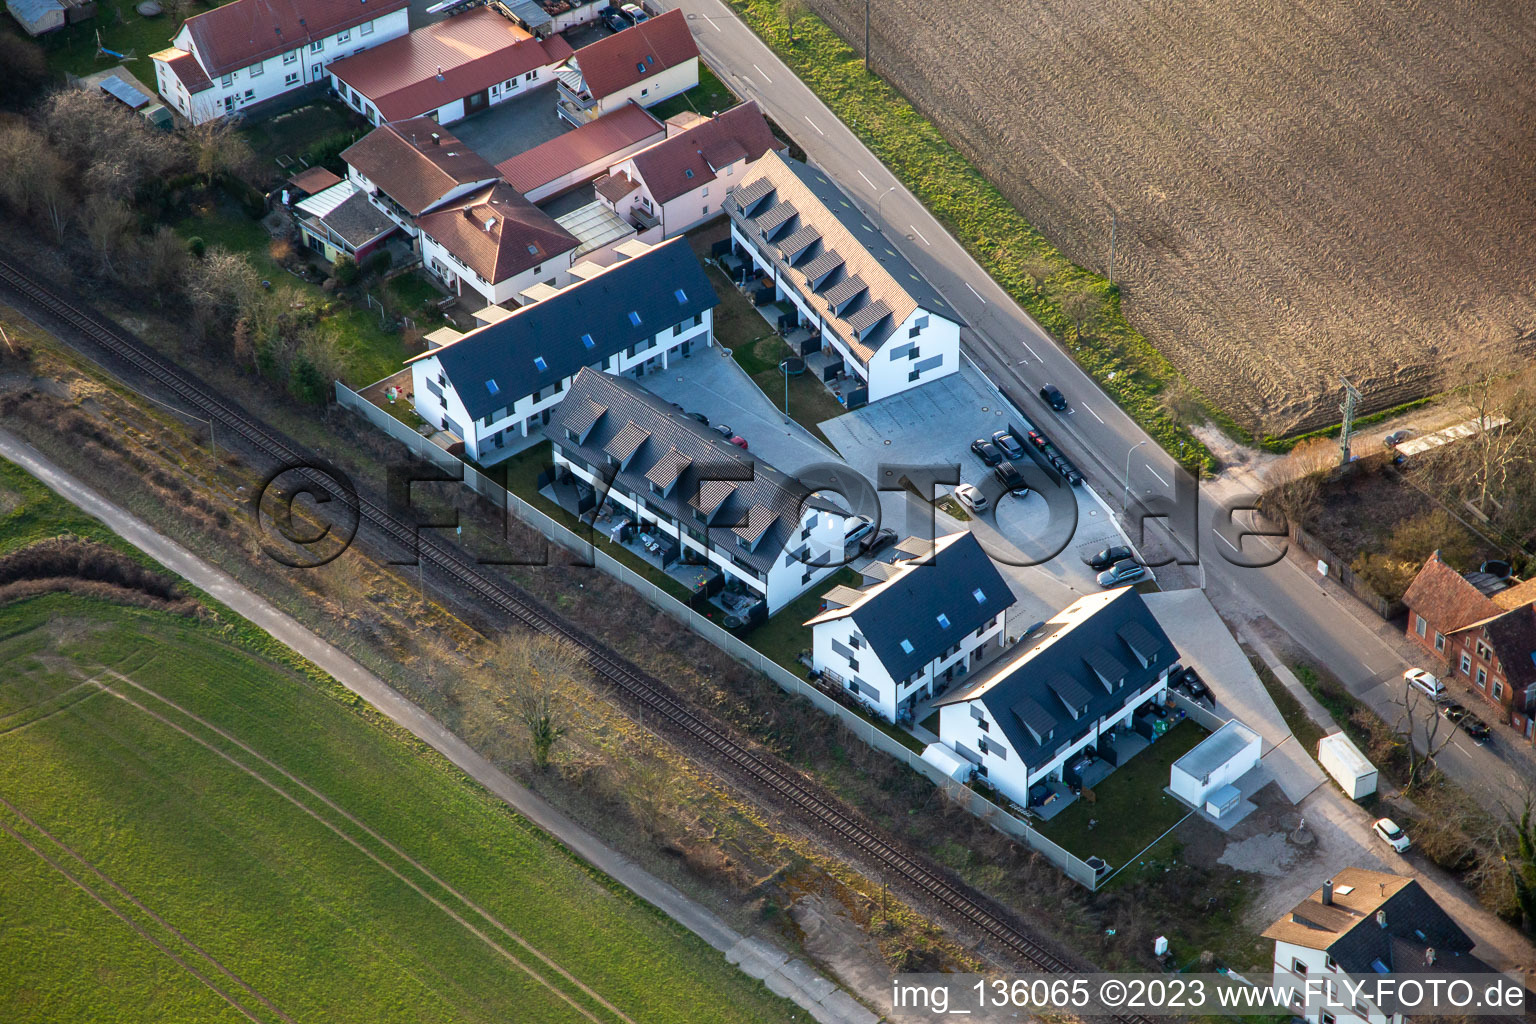 New terraced house development at Schaidter train station in Steinfeld in the state Rhineland-Palatinate, Germany